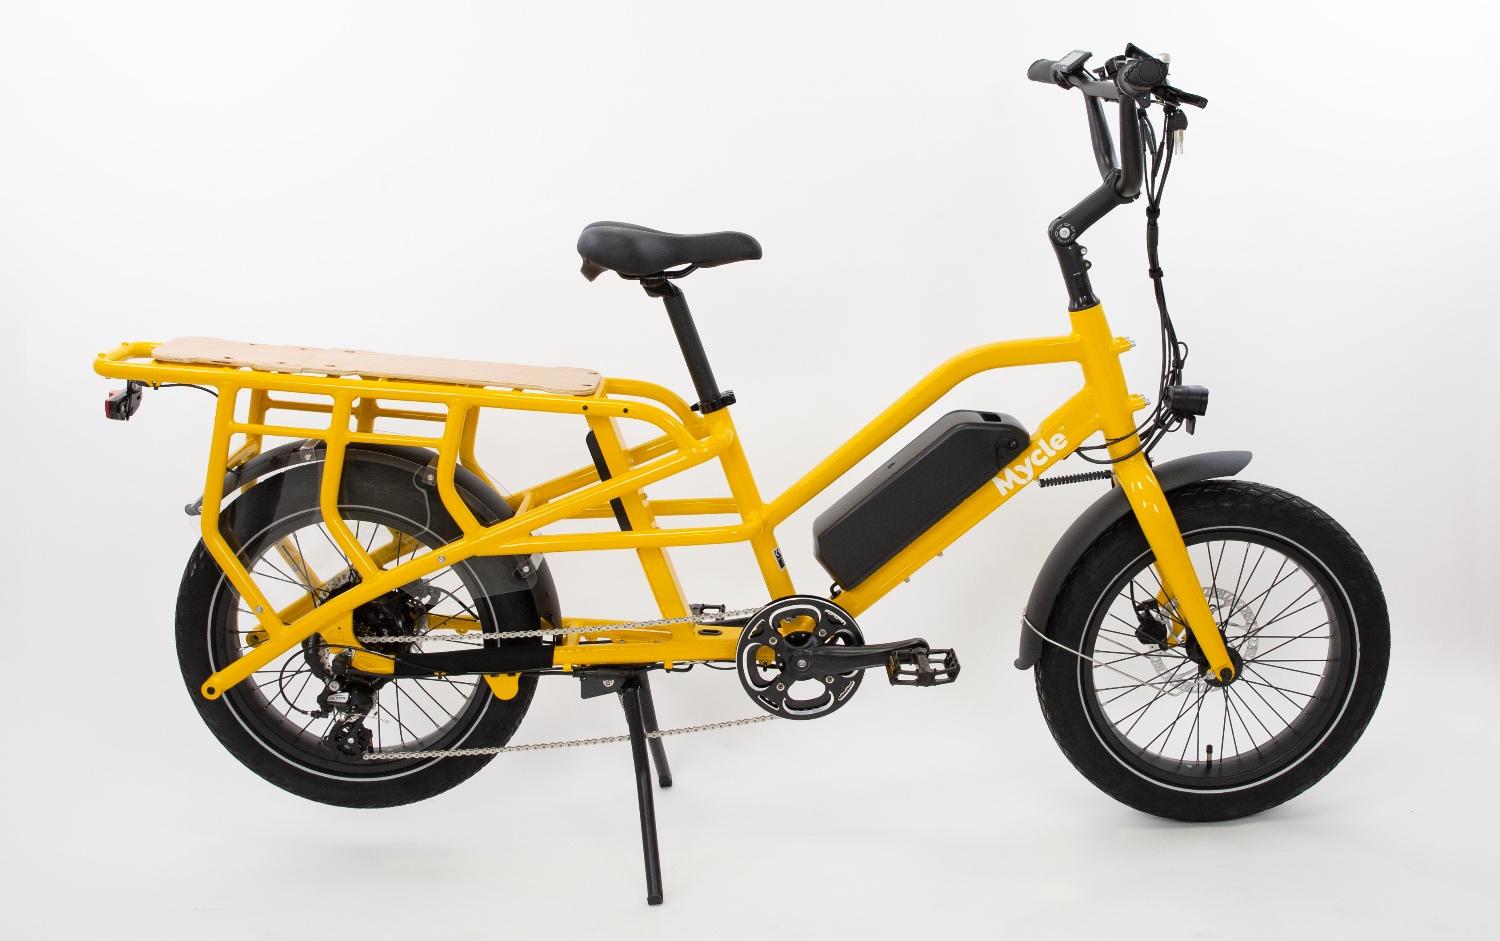 Mycle launch updated version of their cargo bike - all features of the Mycle cargo bike